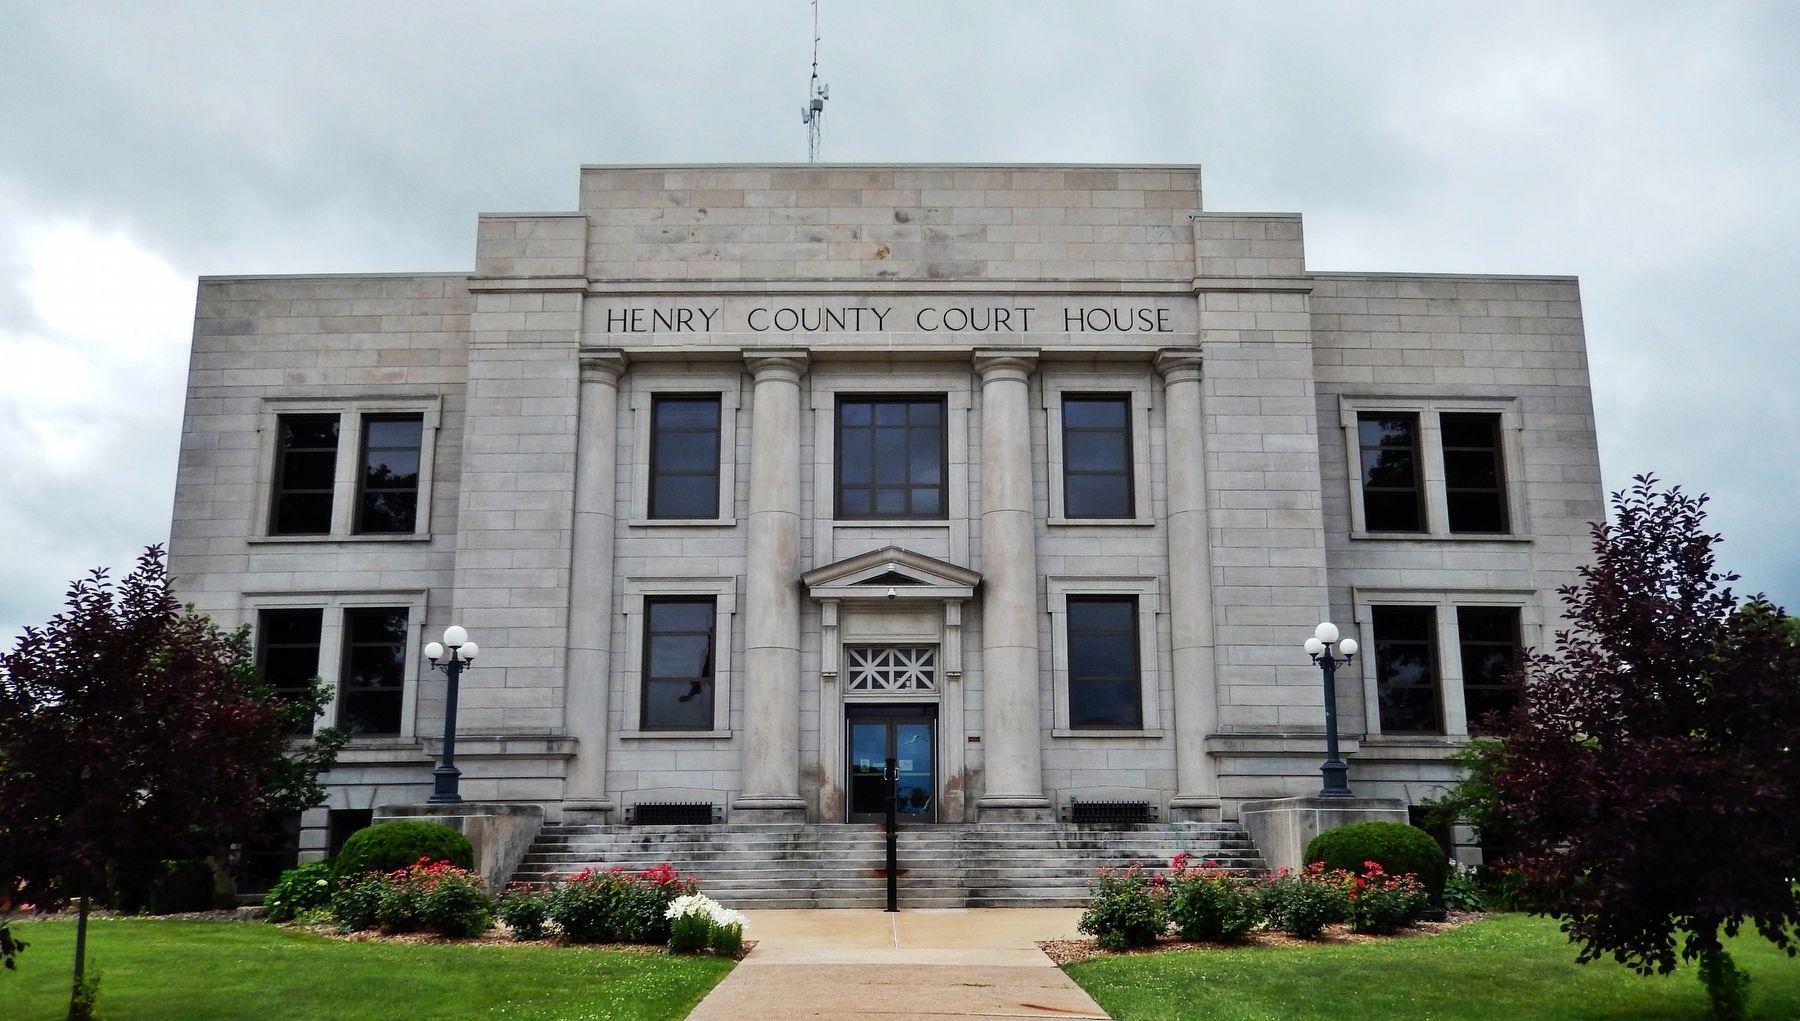 Henry County Court House (<i>north/front elevation</i>) image. Click for full size.